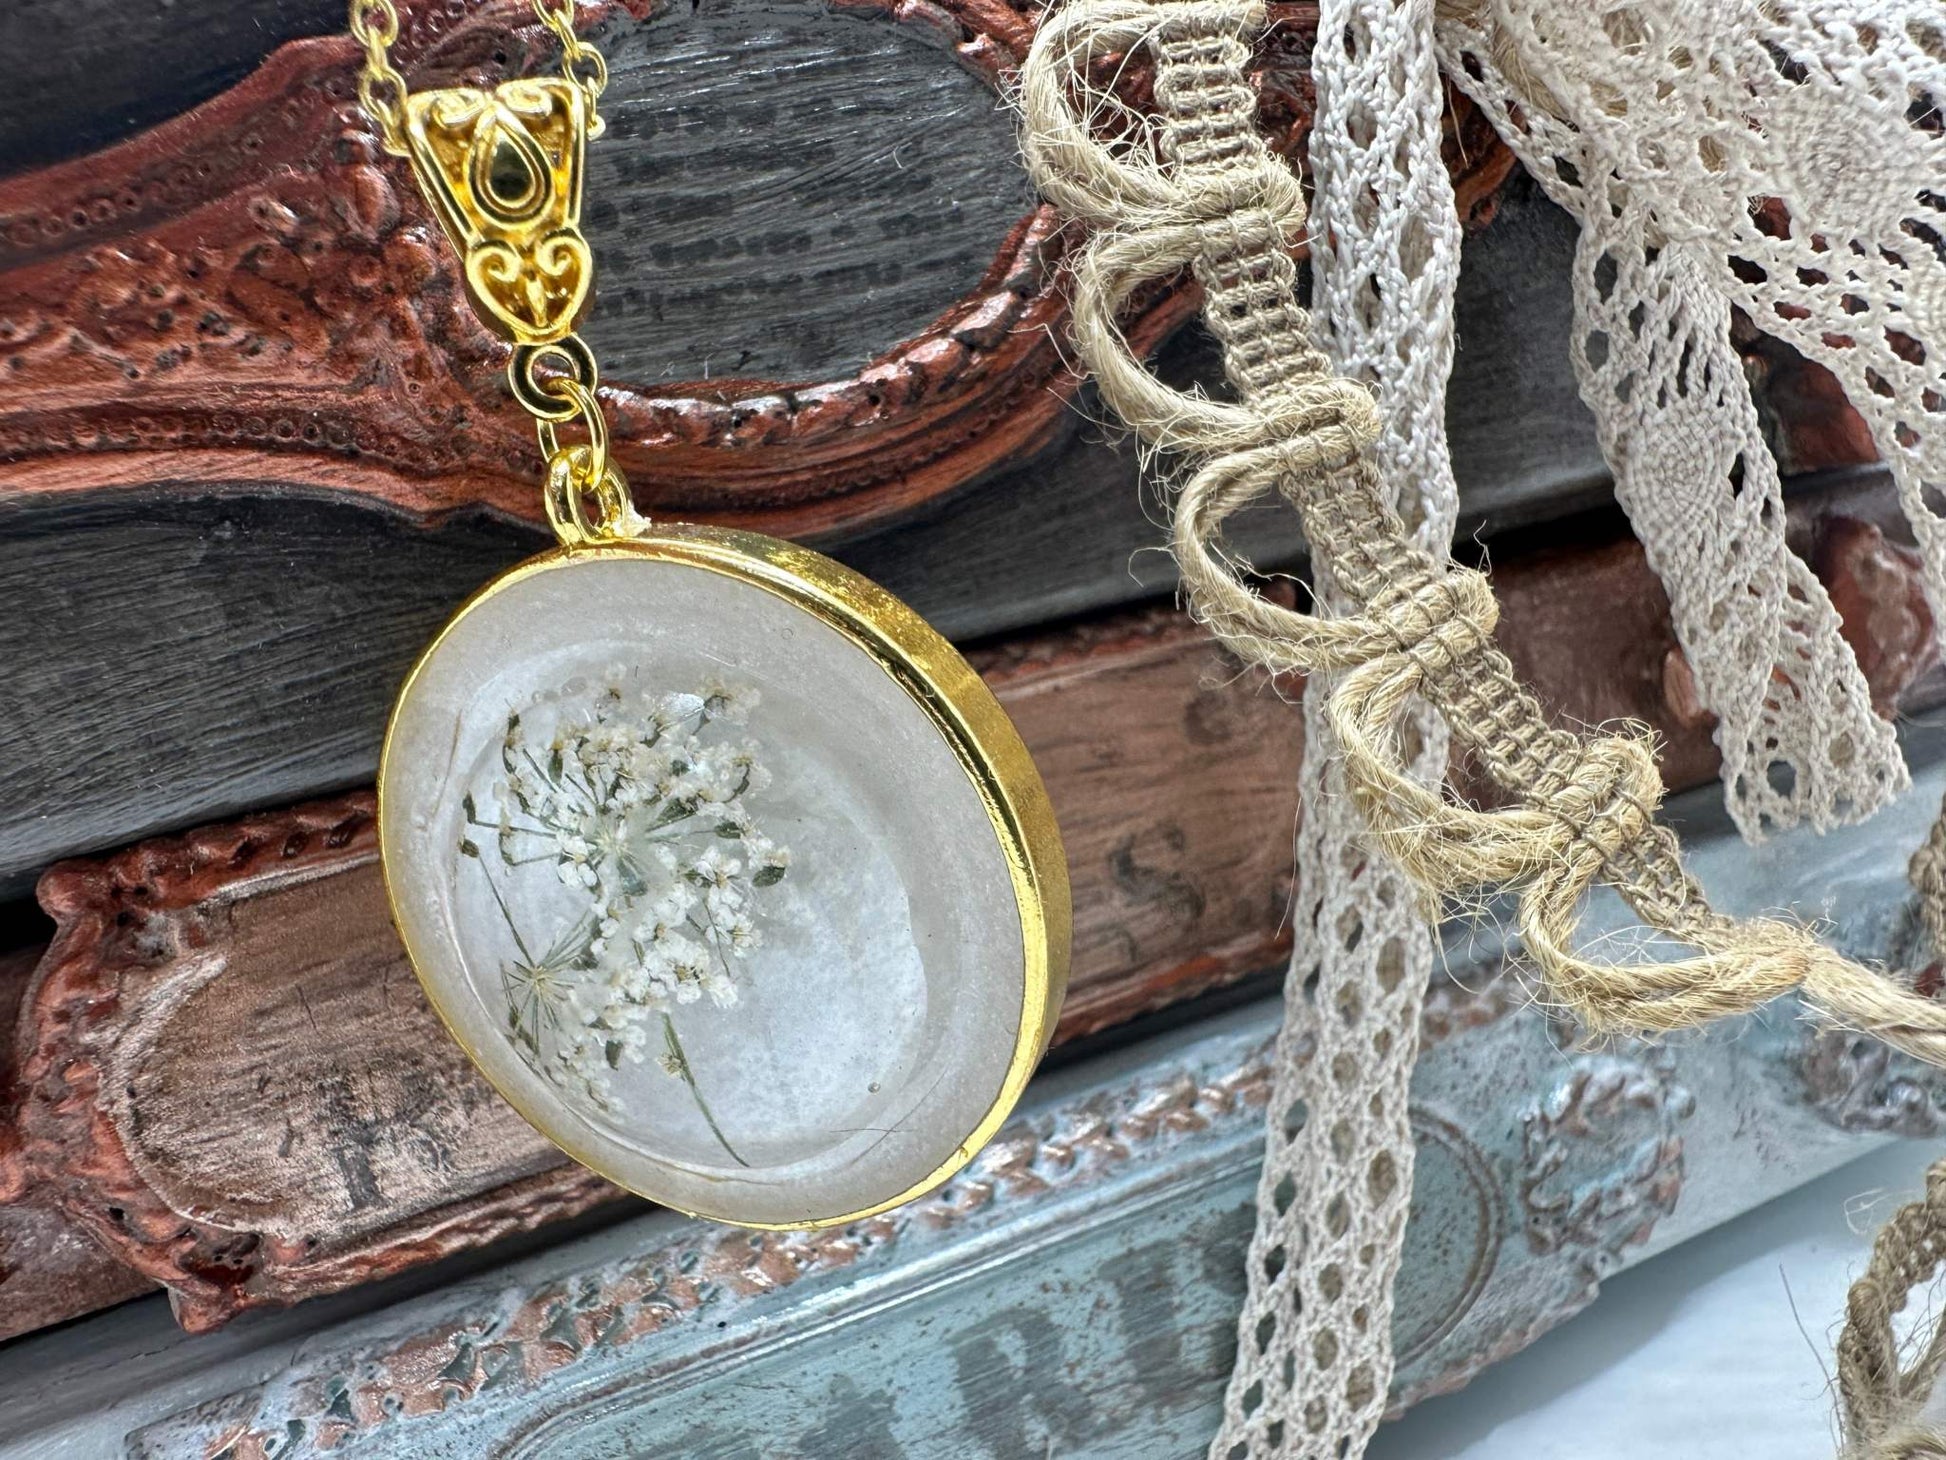 Queen Anne's Lace Handmade Necklace - Inspired by Mother Nature